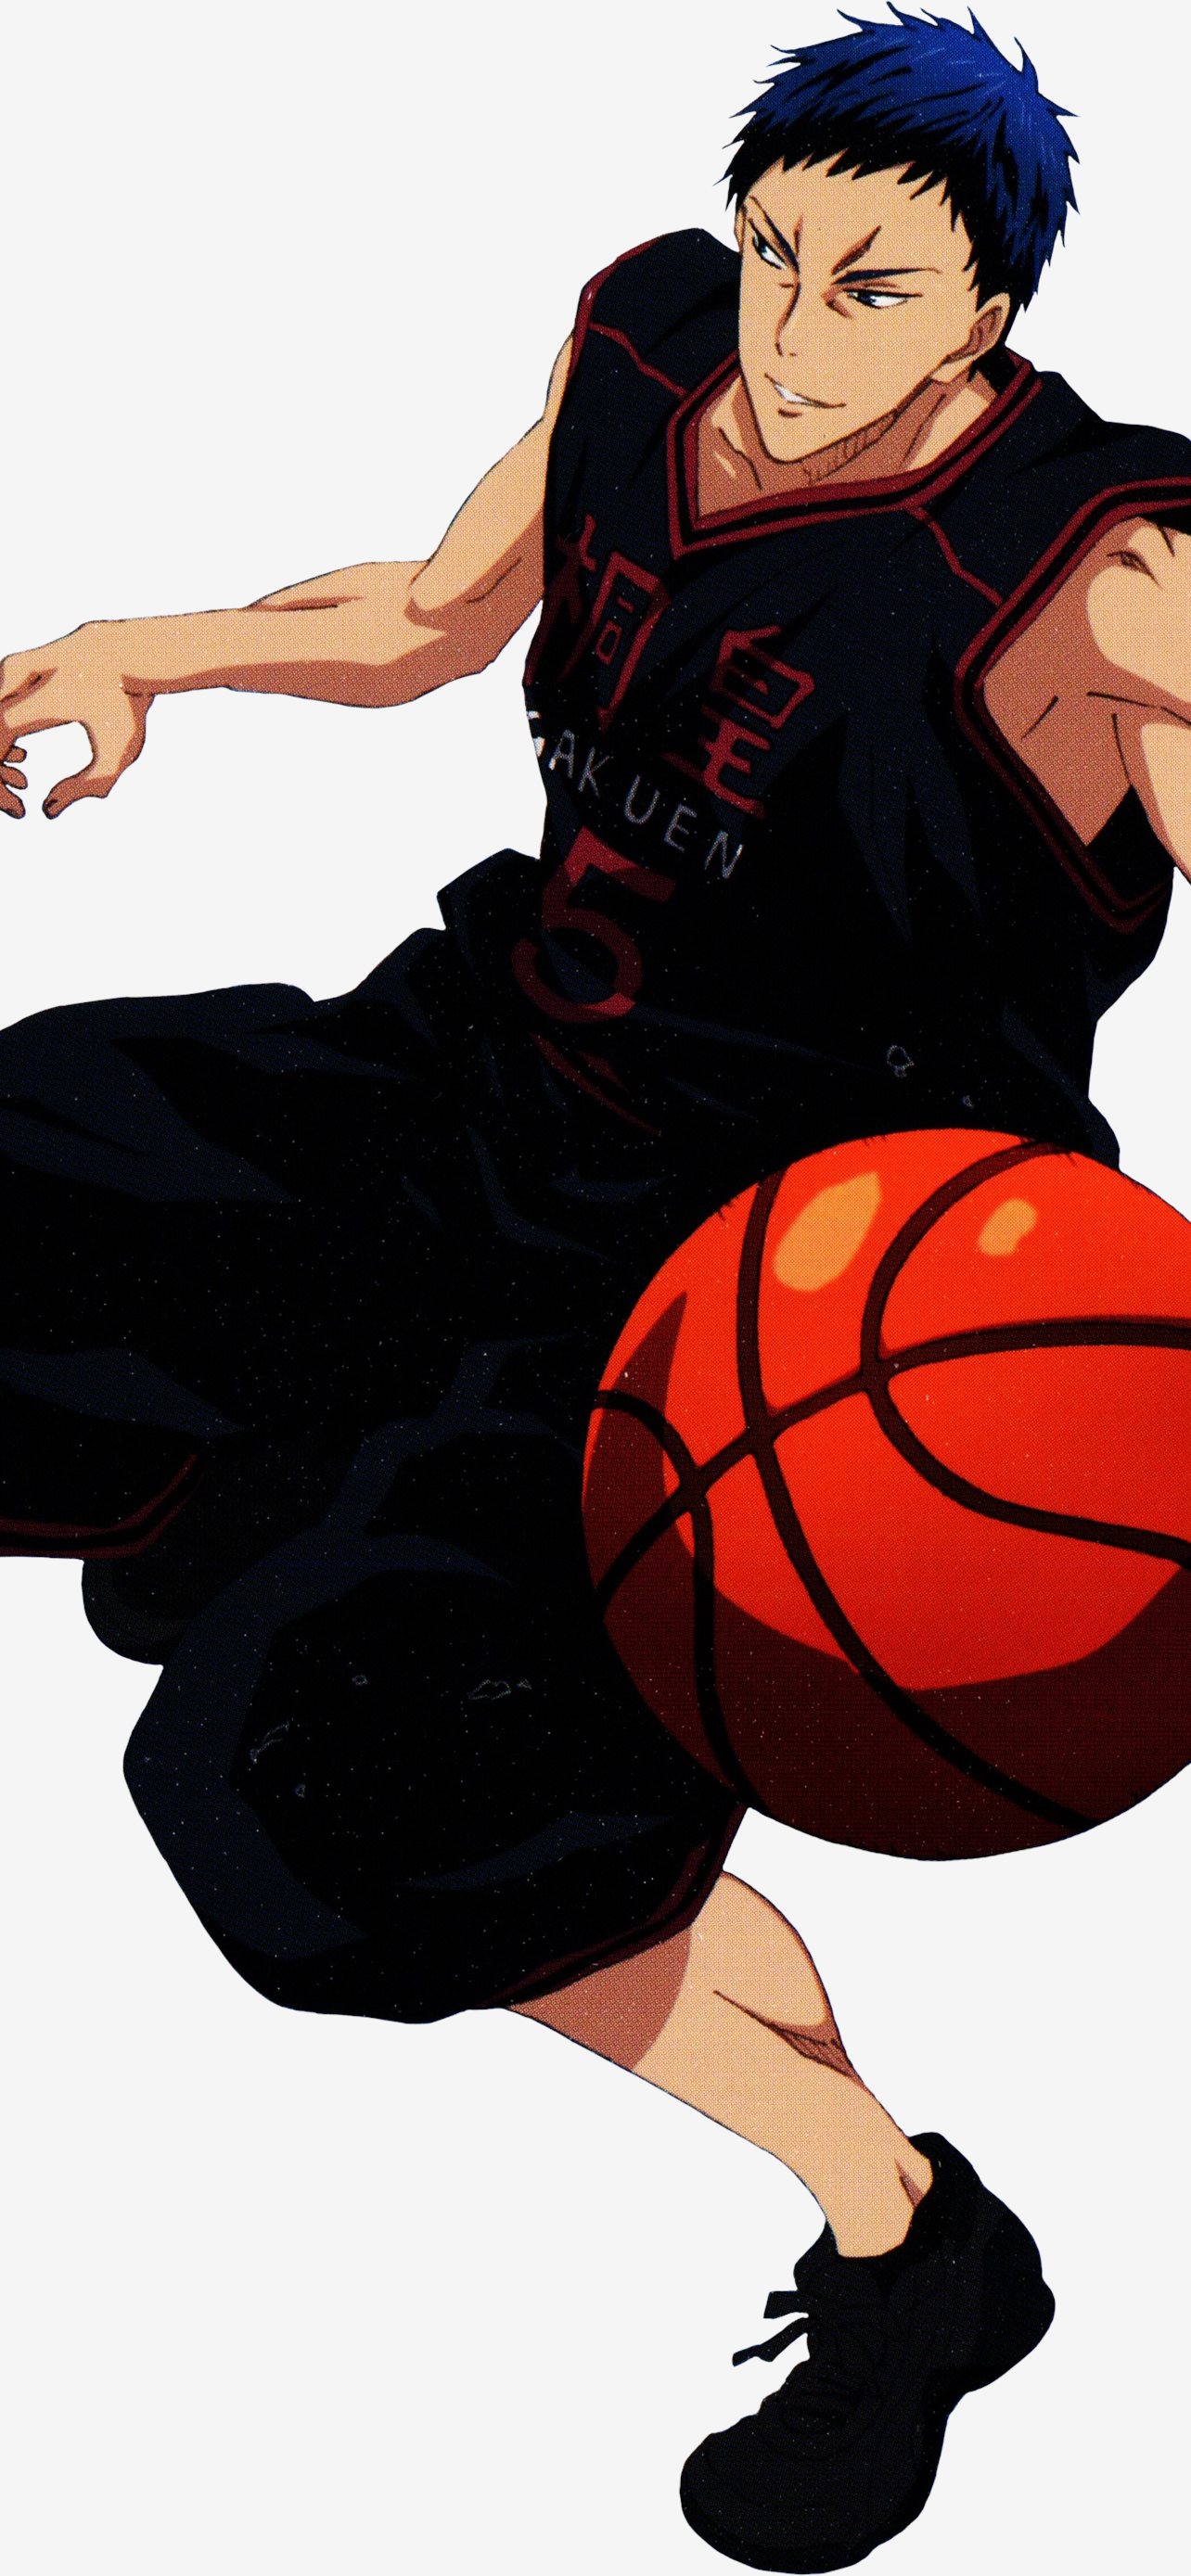 Wallpaper ID: 973773 / wallpaper, no people, arts culture and  entertainment, Ryōta Kise, Anime, close-up, basket, choice, Daiki Aomine,  representation, electricity, illuminated free download